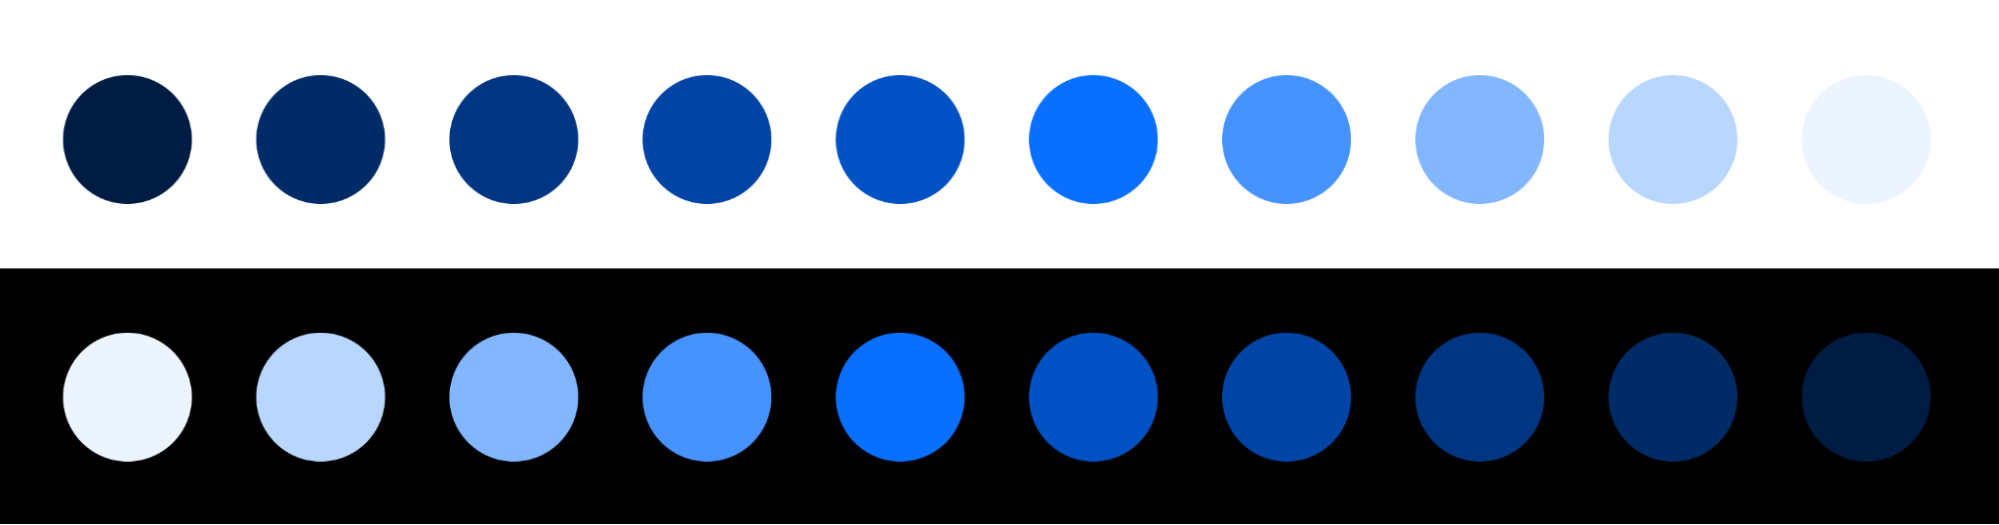 Our blue color scale after calling reverse on it. High luminosity colors are now at the start of the scale, making them contrast accessible with darker backgrounds (and vice-versa).